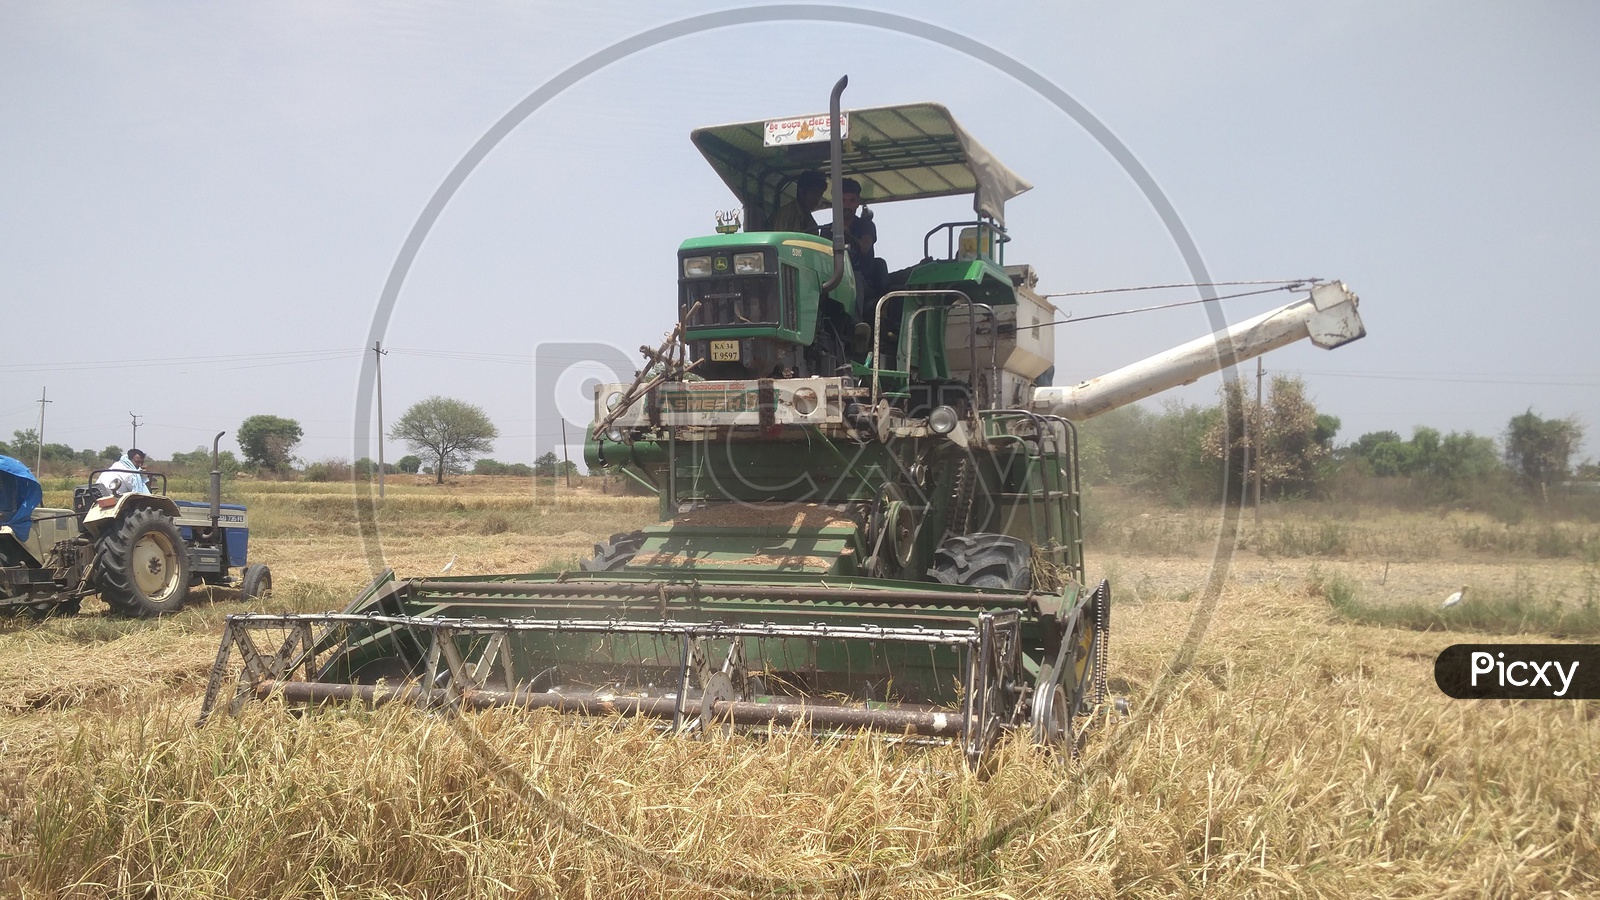 A Tractor or Harvester in Agriculture Field